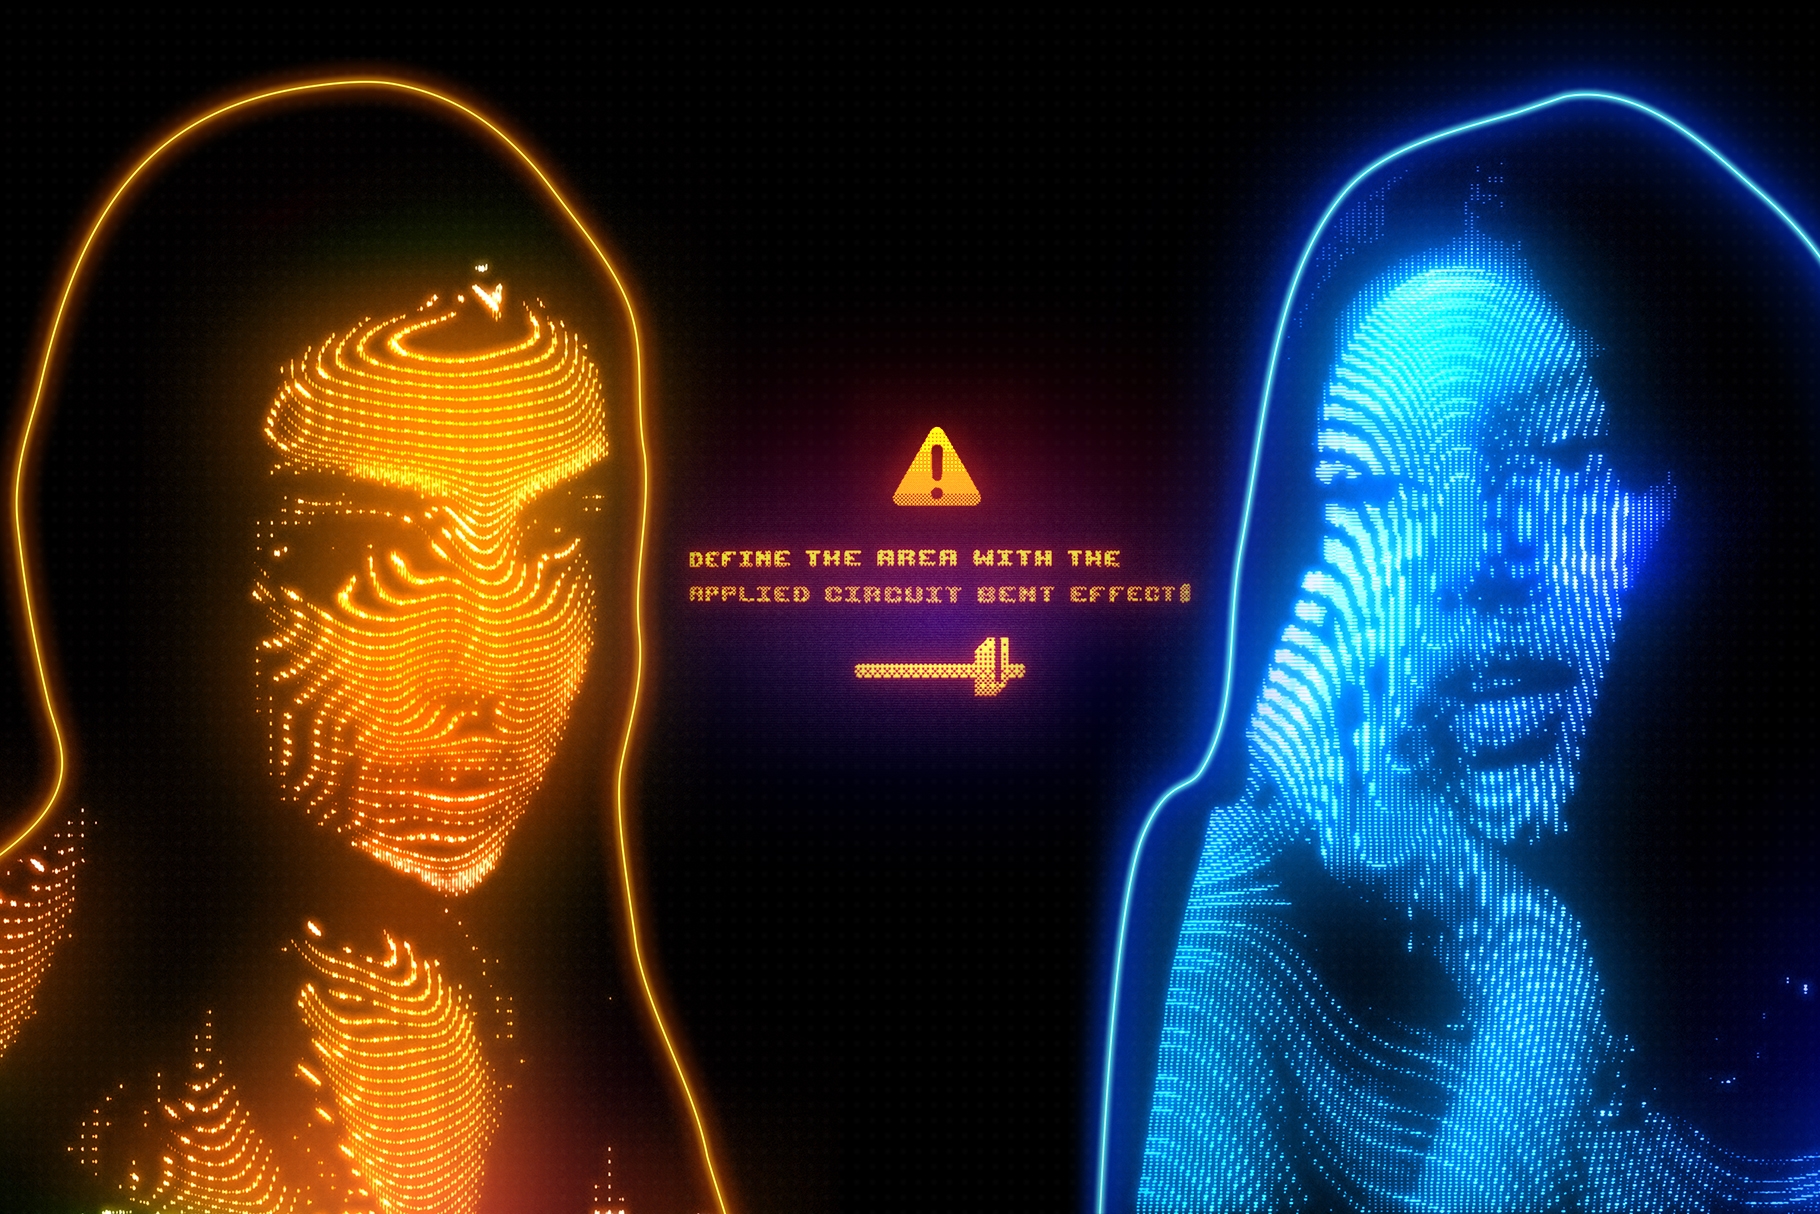 Waveloq UXP plug-in for Adobe Photoshop offers unbound editing and customization options, allowing artists to develop and create wild cyber neon effects.